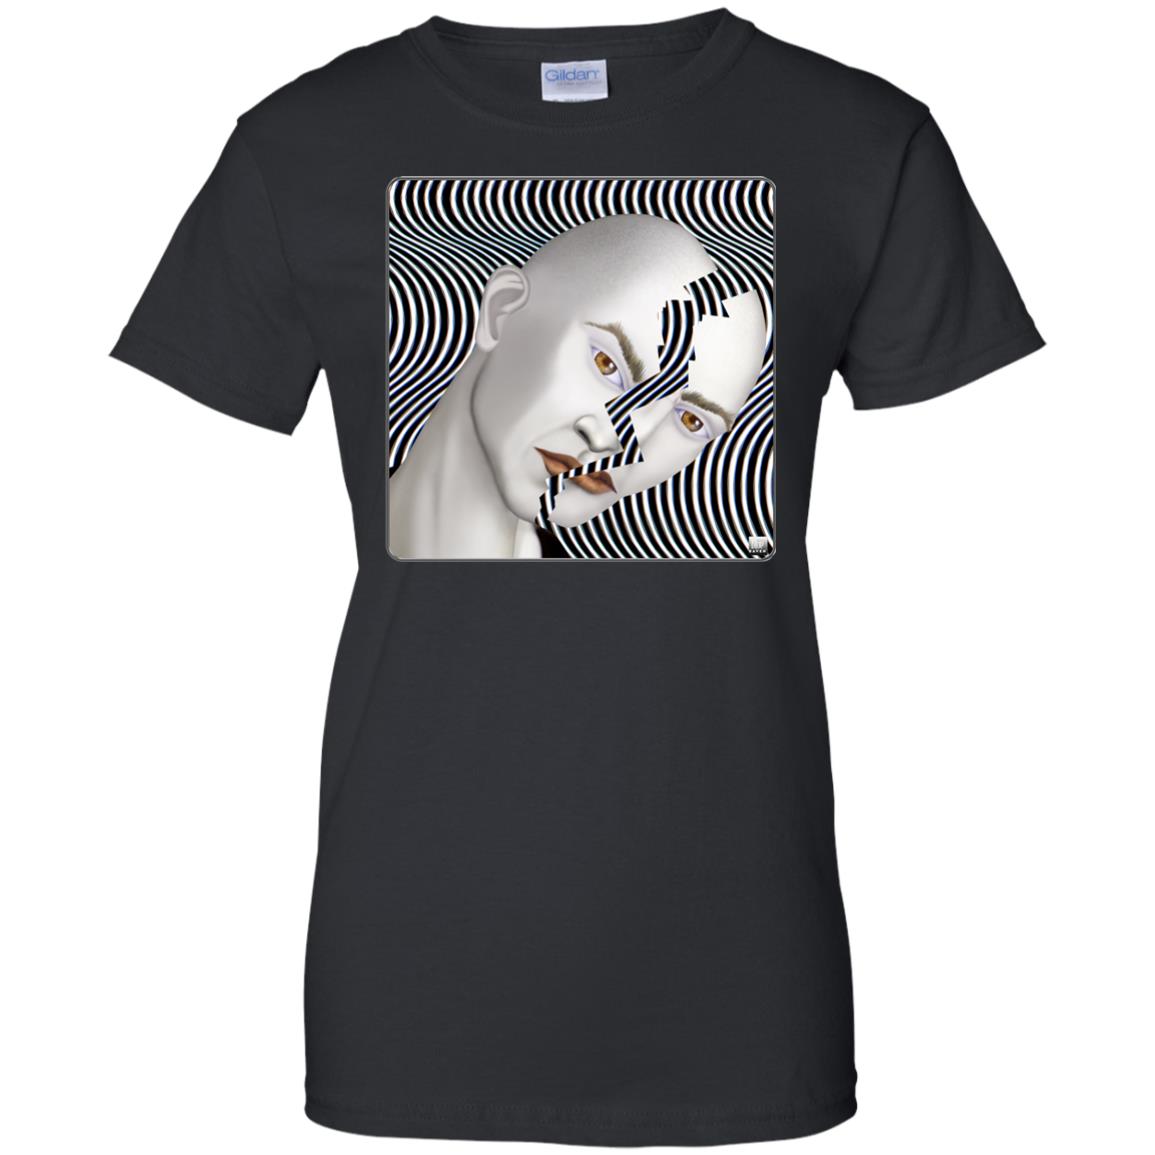 cracked until coffee - Women's Relaxed Fit T-Shirt